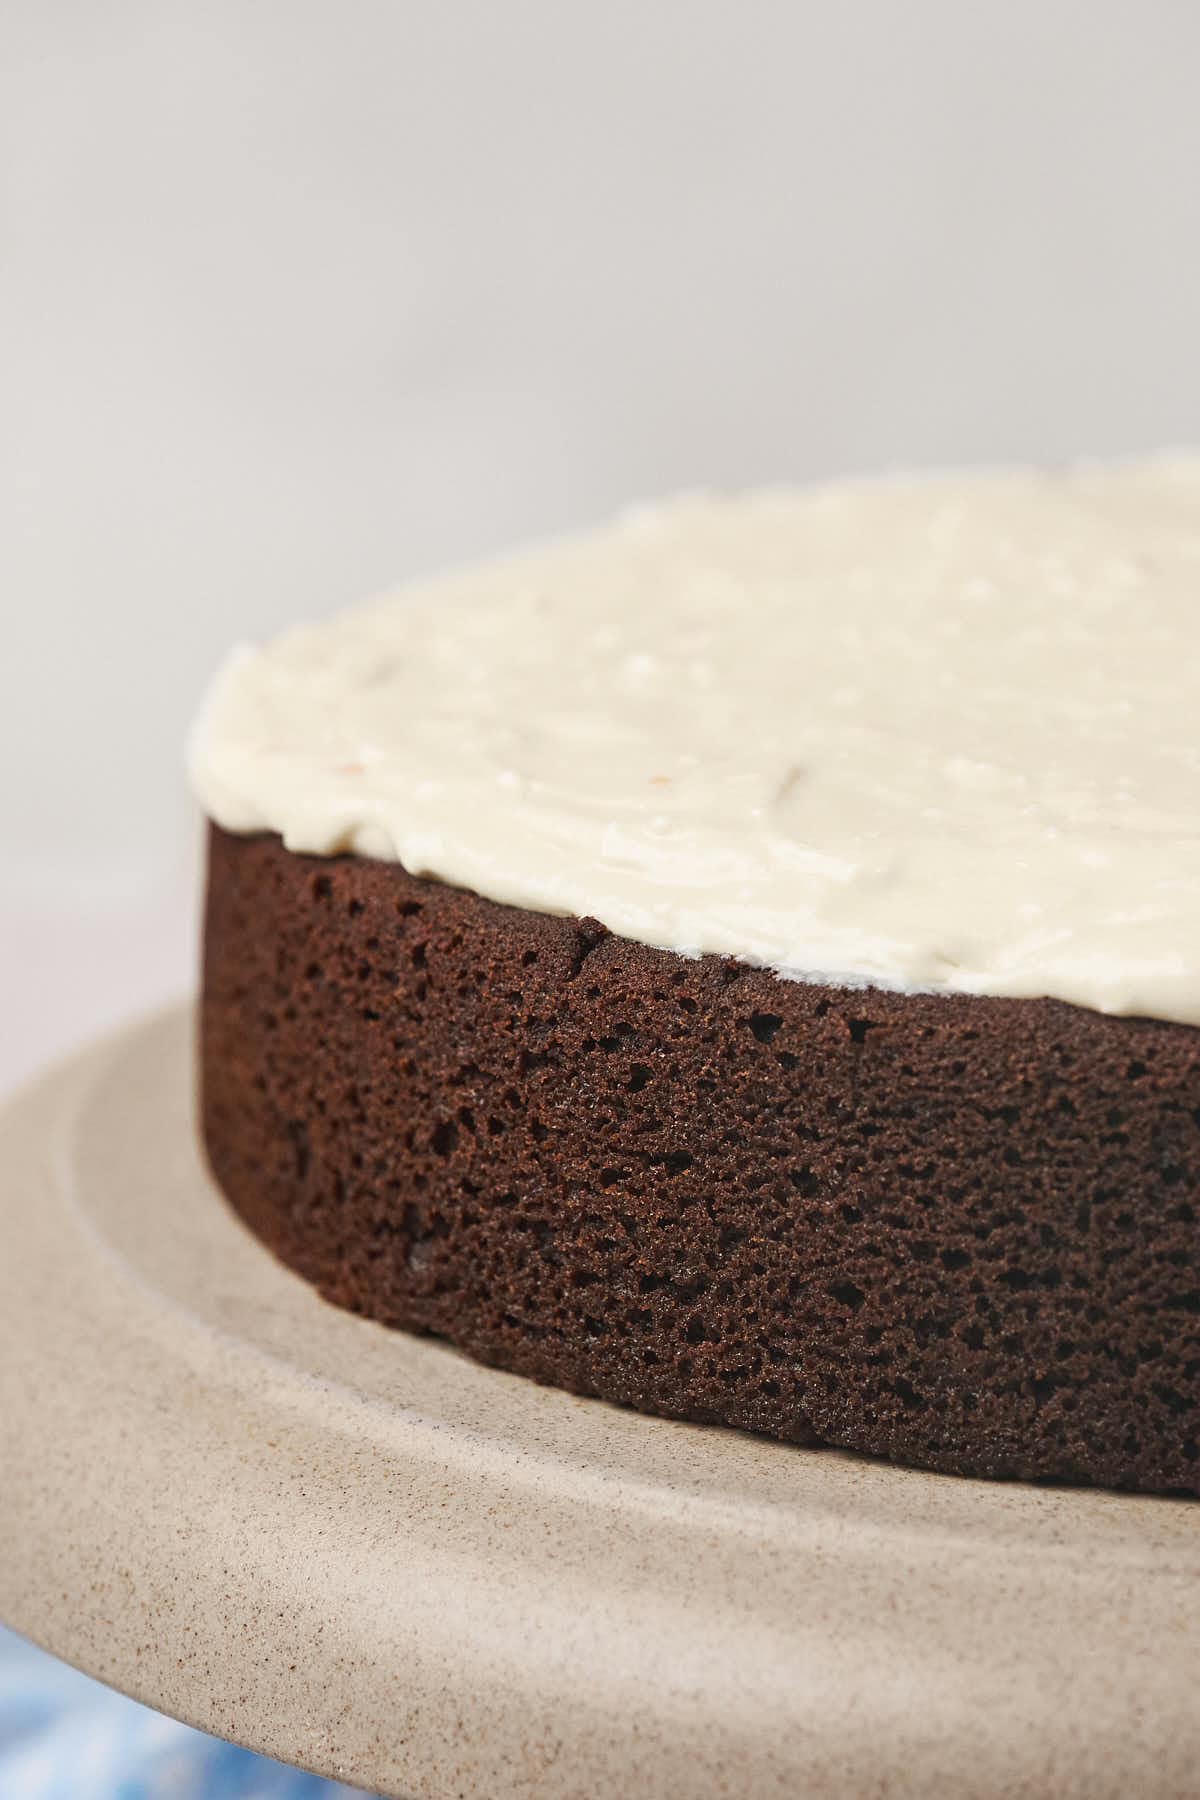 A close-up of a round chocolate cake with white frosting on top, placed on a beige cake stand.